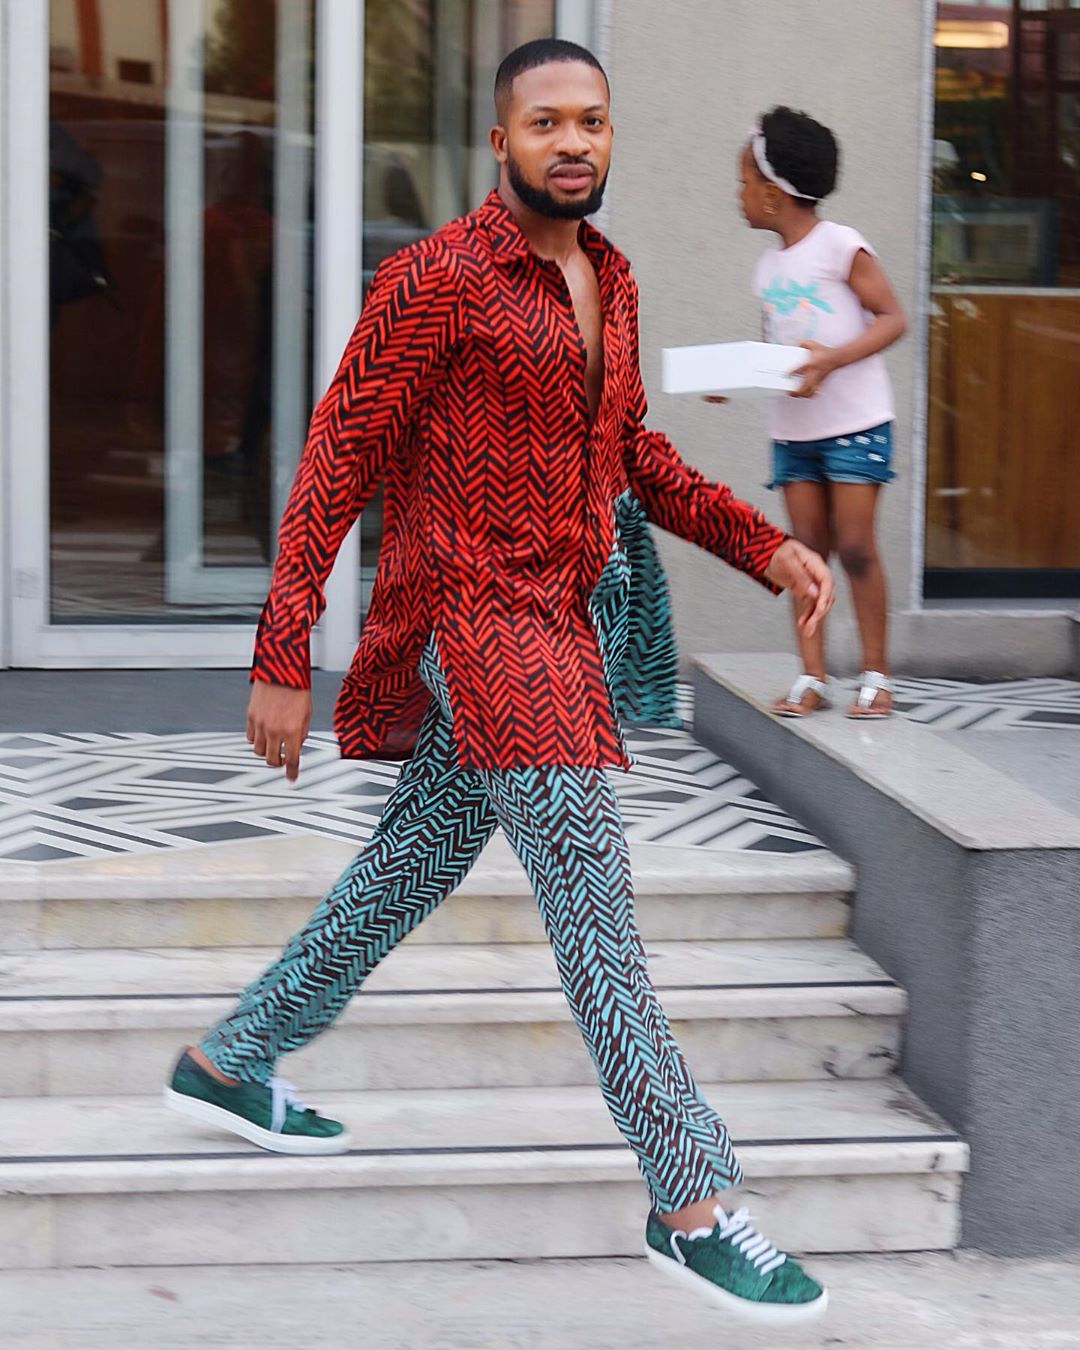 Best Dressed Of The Week, Week Of May 12th: Who Killed It In The Style ...